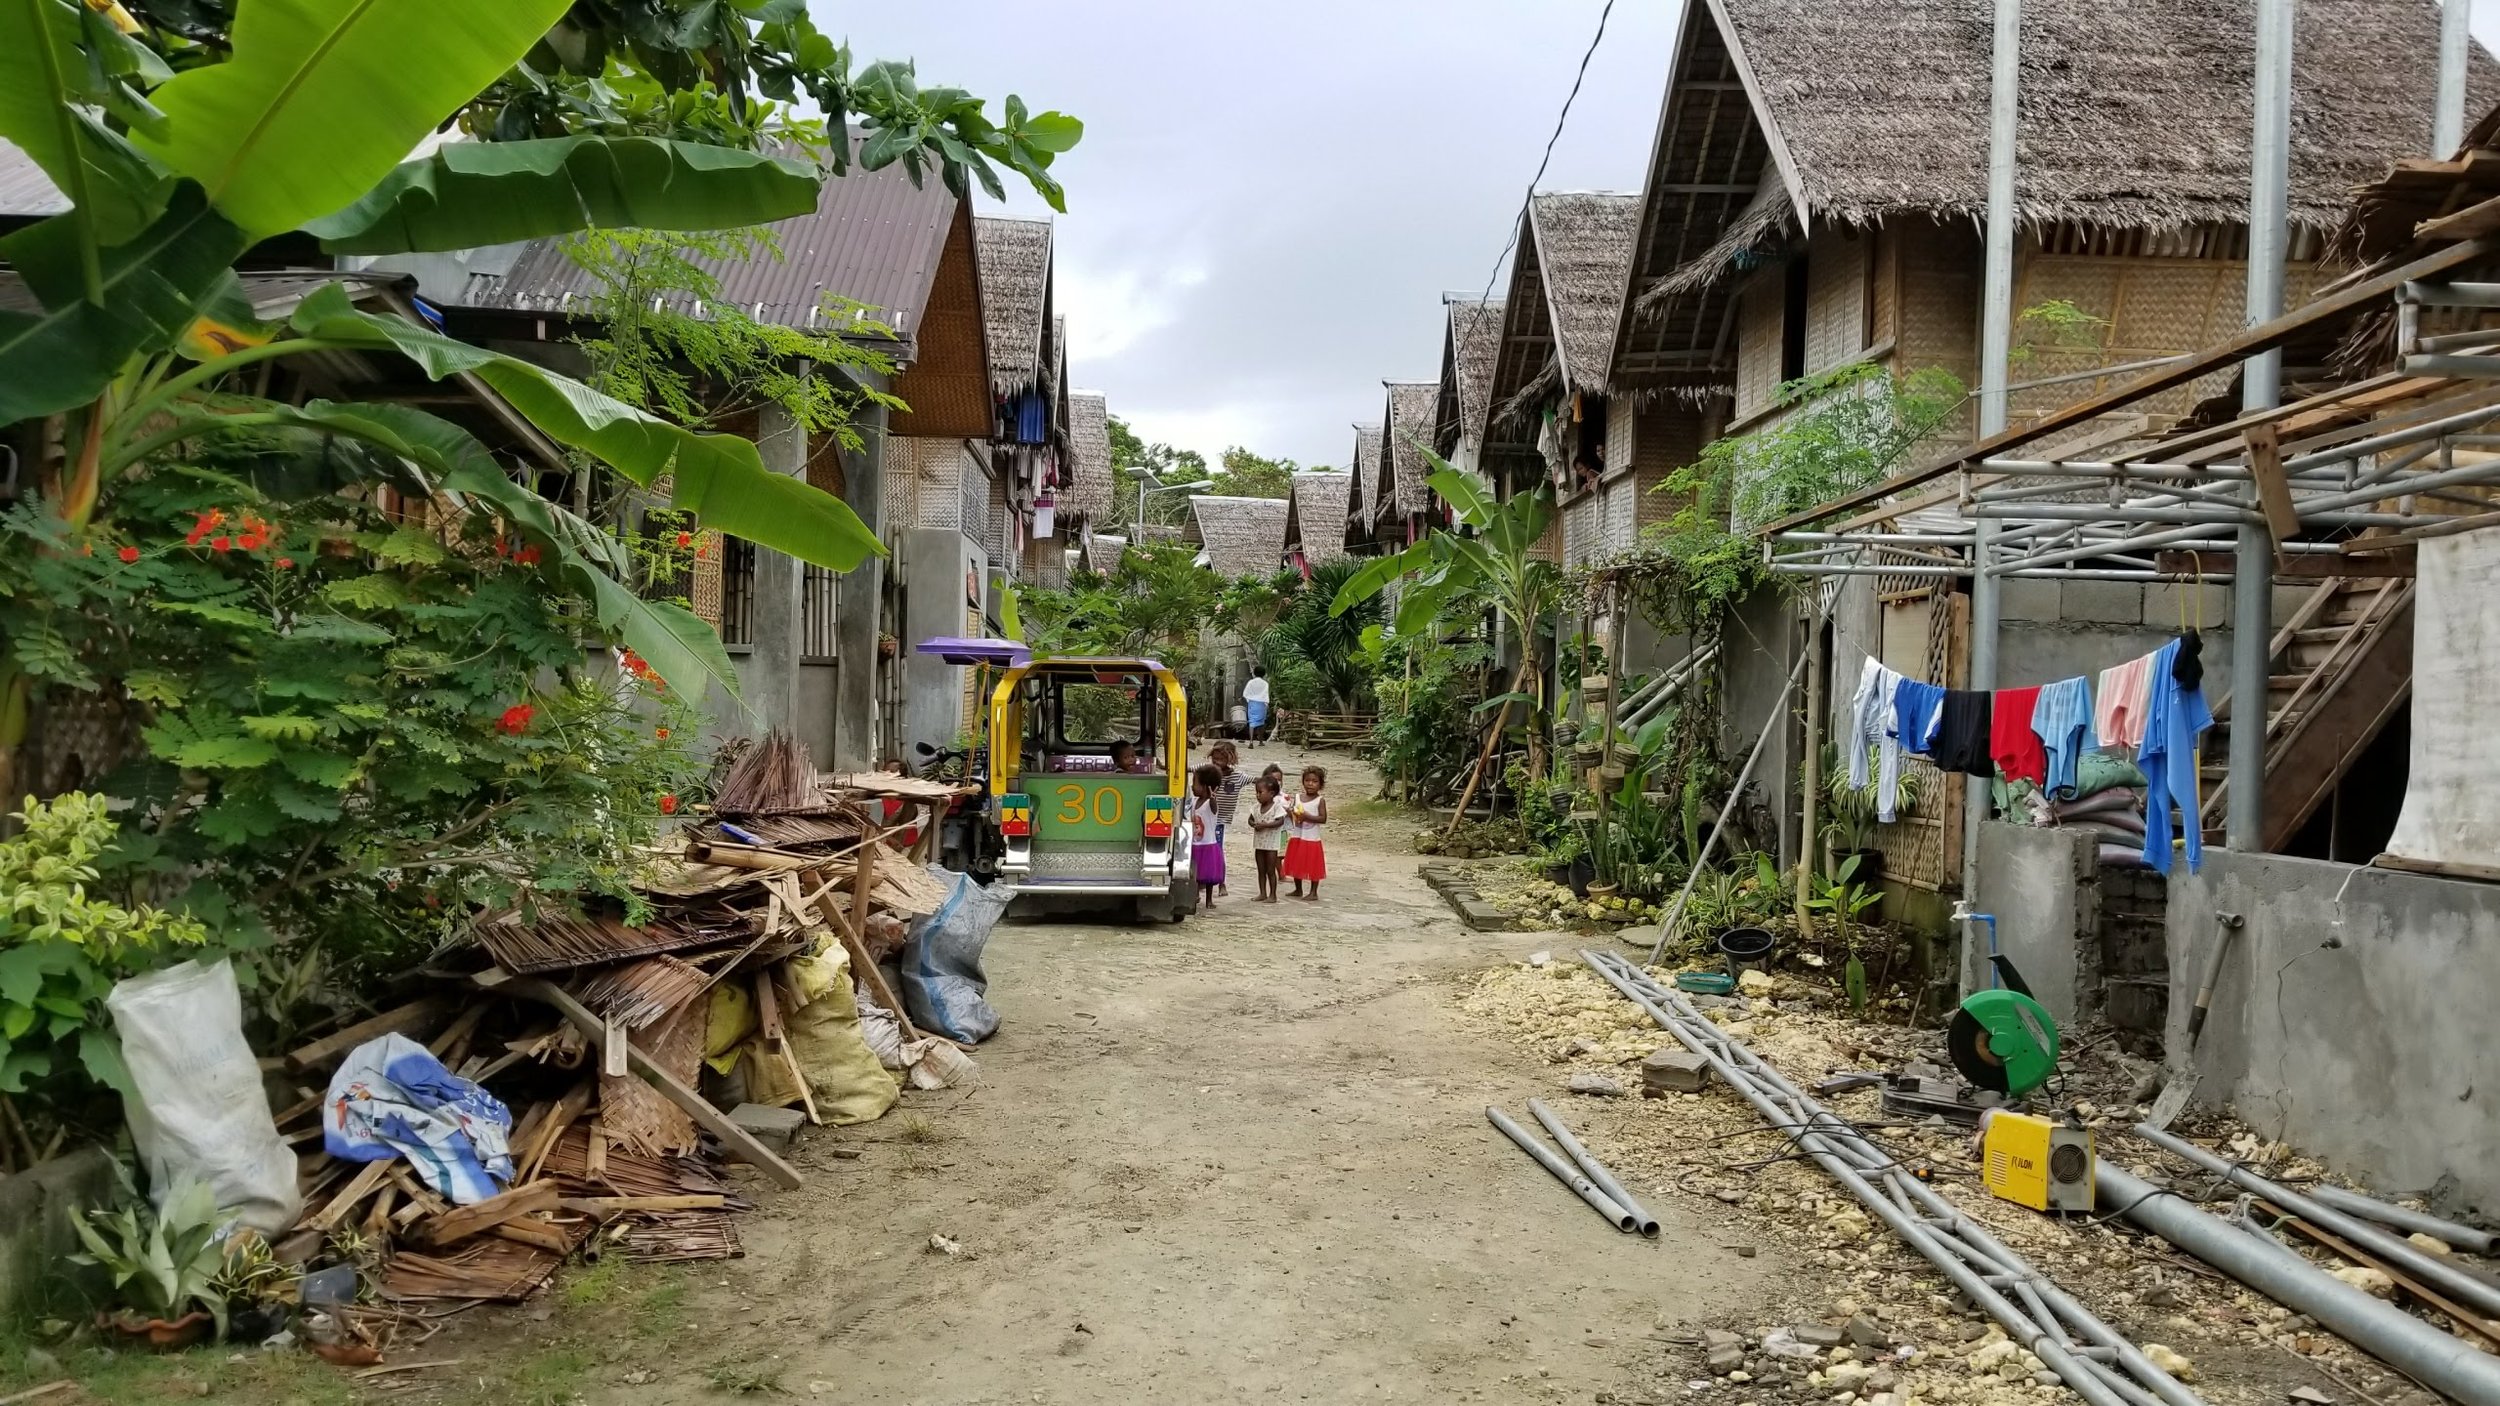  The Ati Village on the island of Boracay in the Philippines 